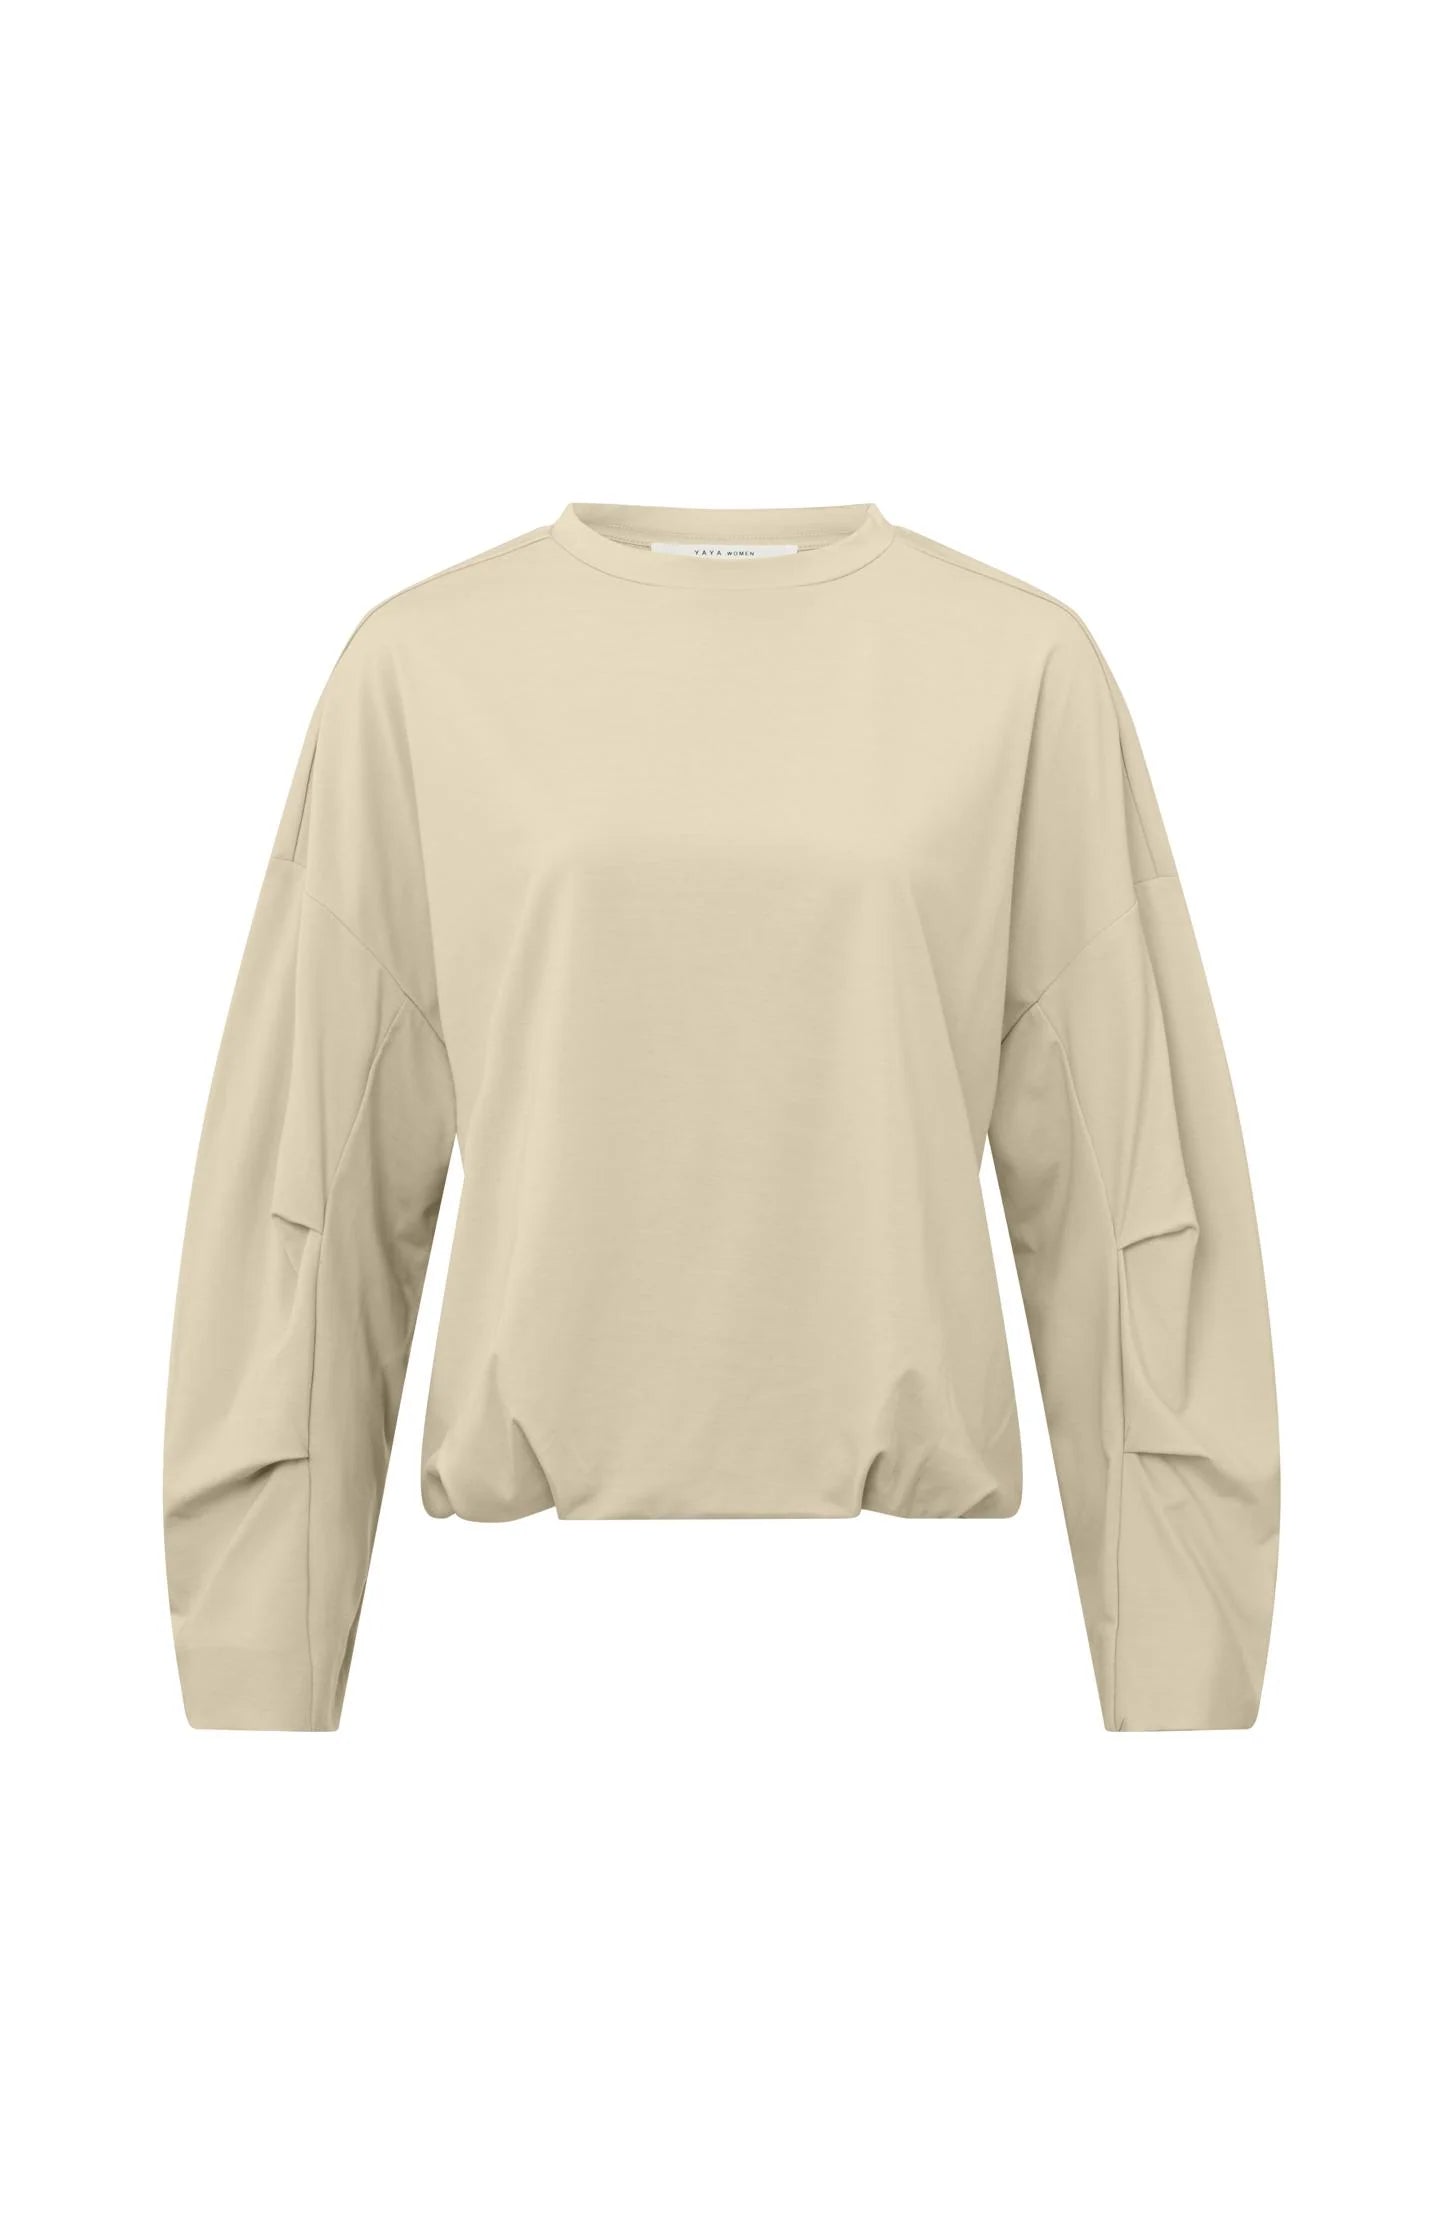 Pleated Crewneck in Summer Sand